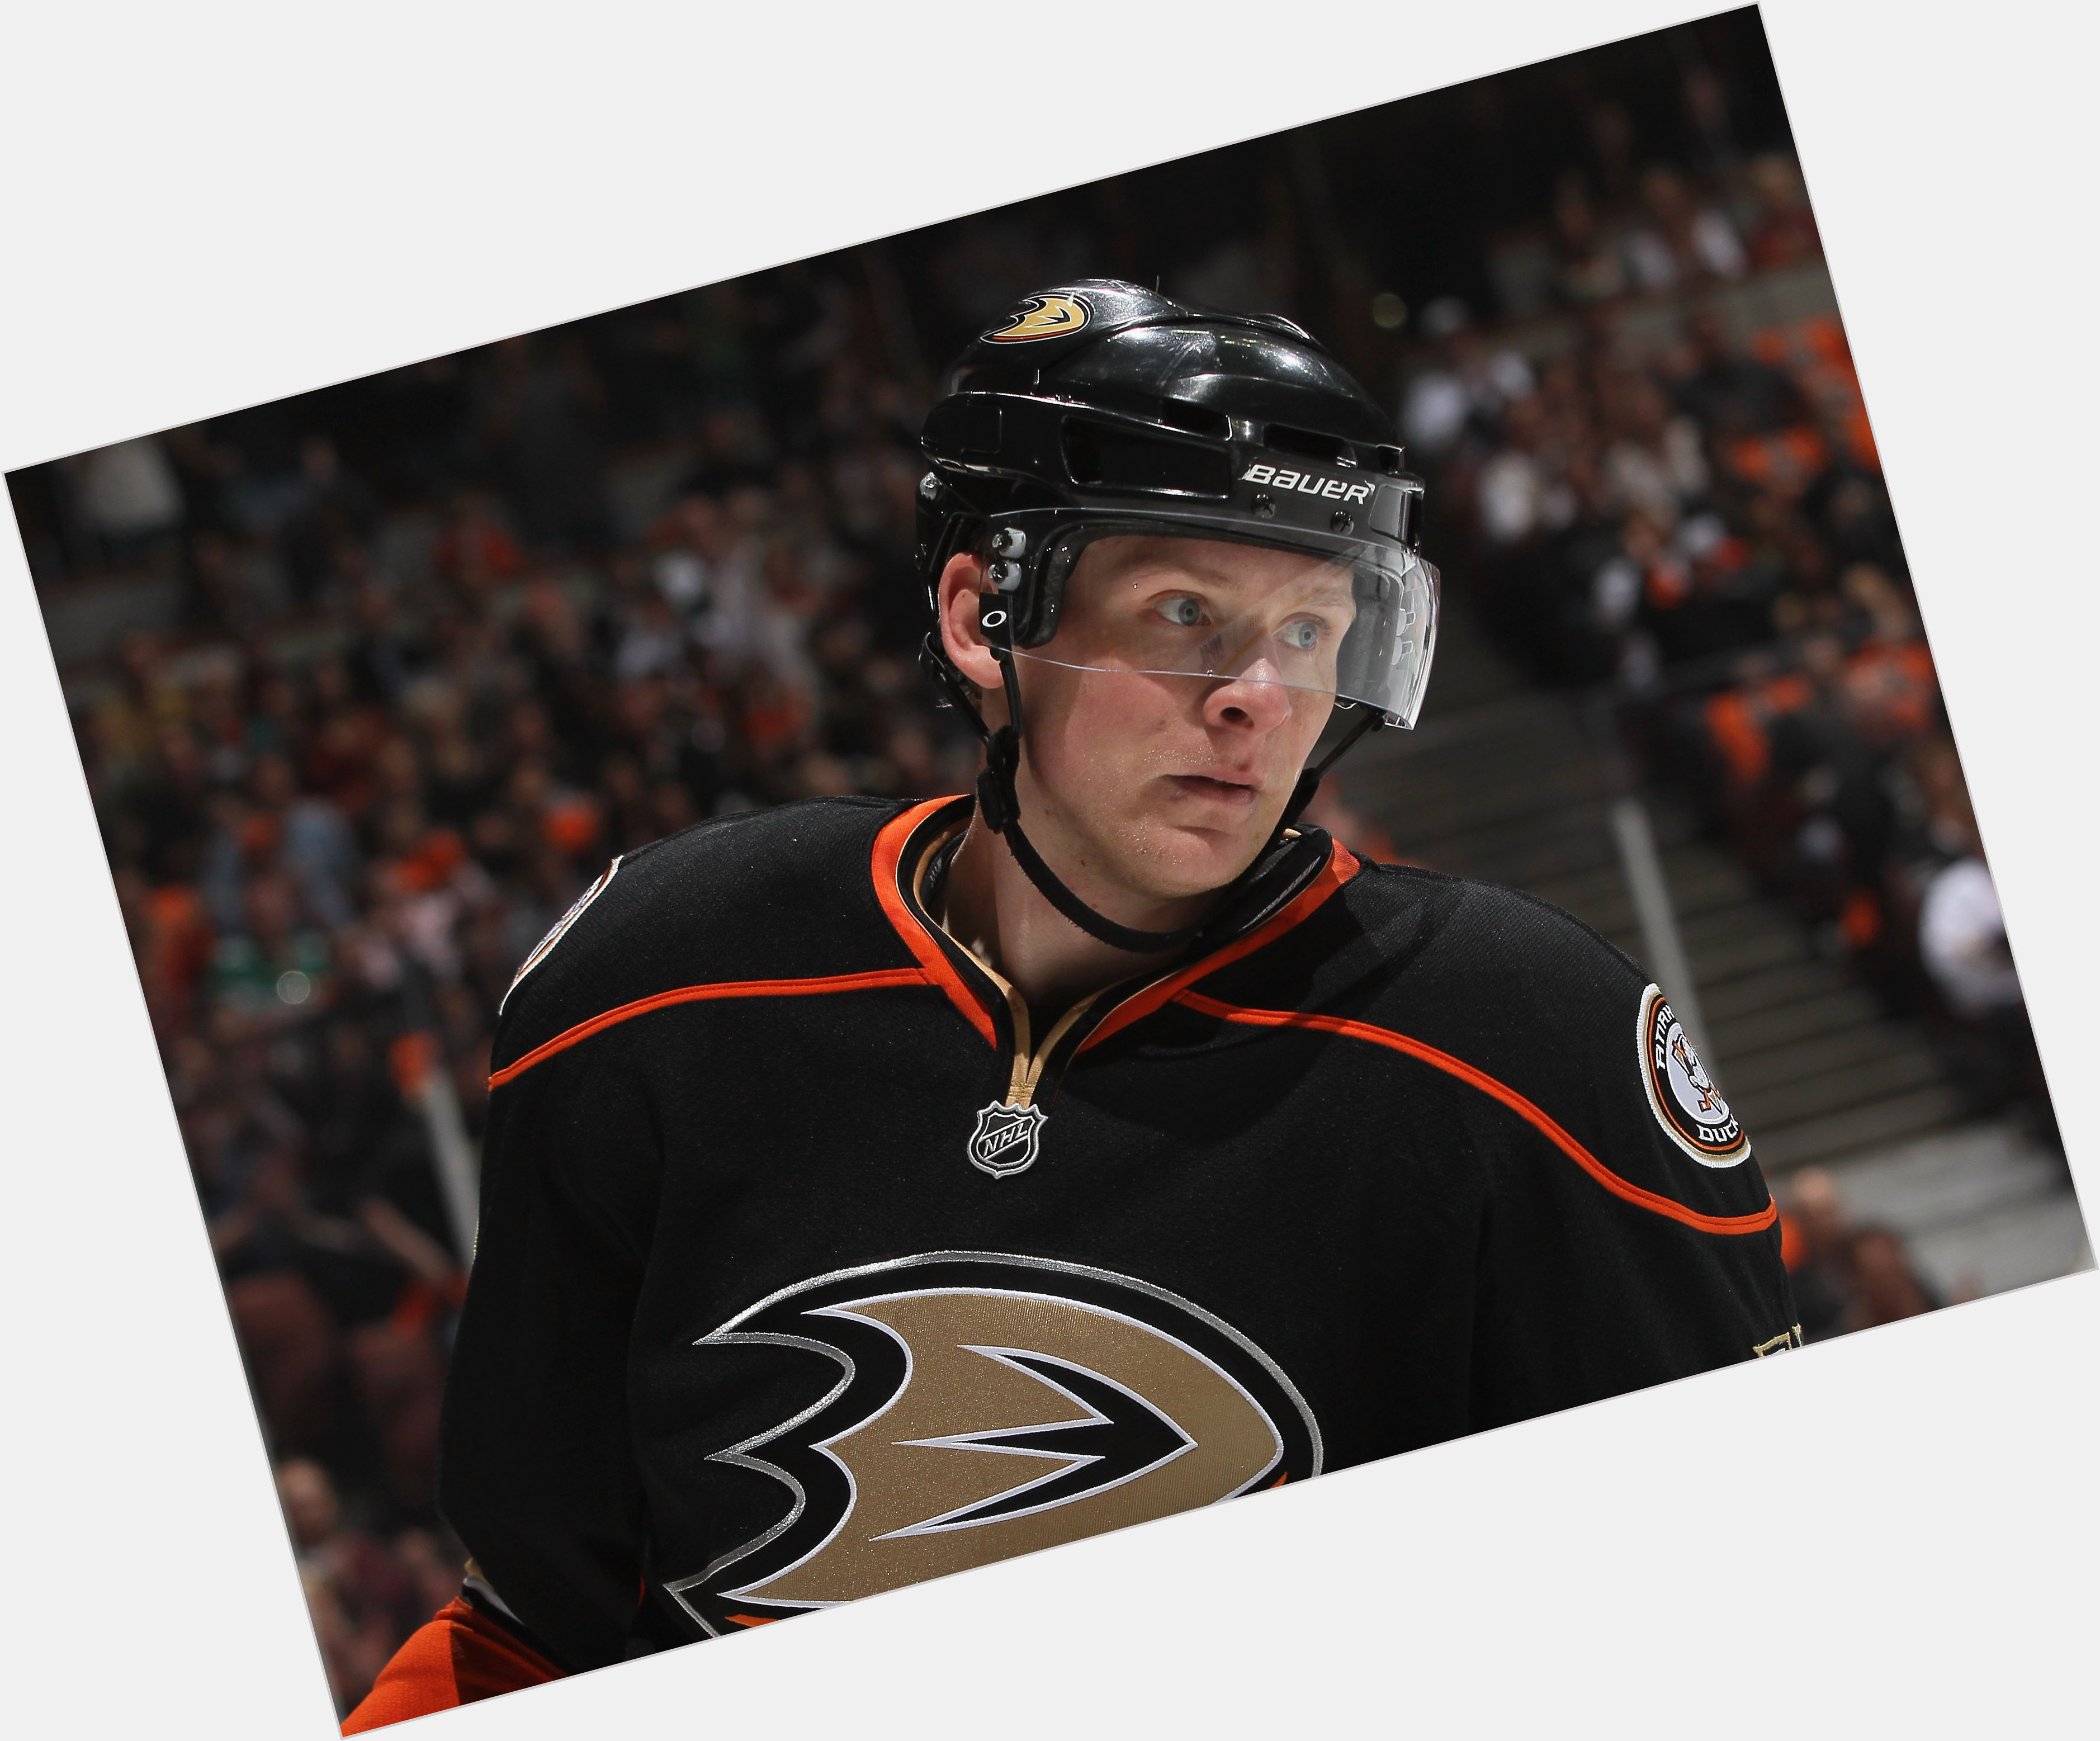 Corey Perry dating 2